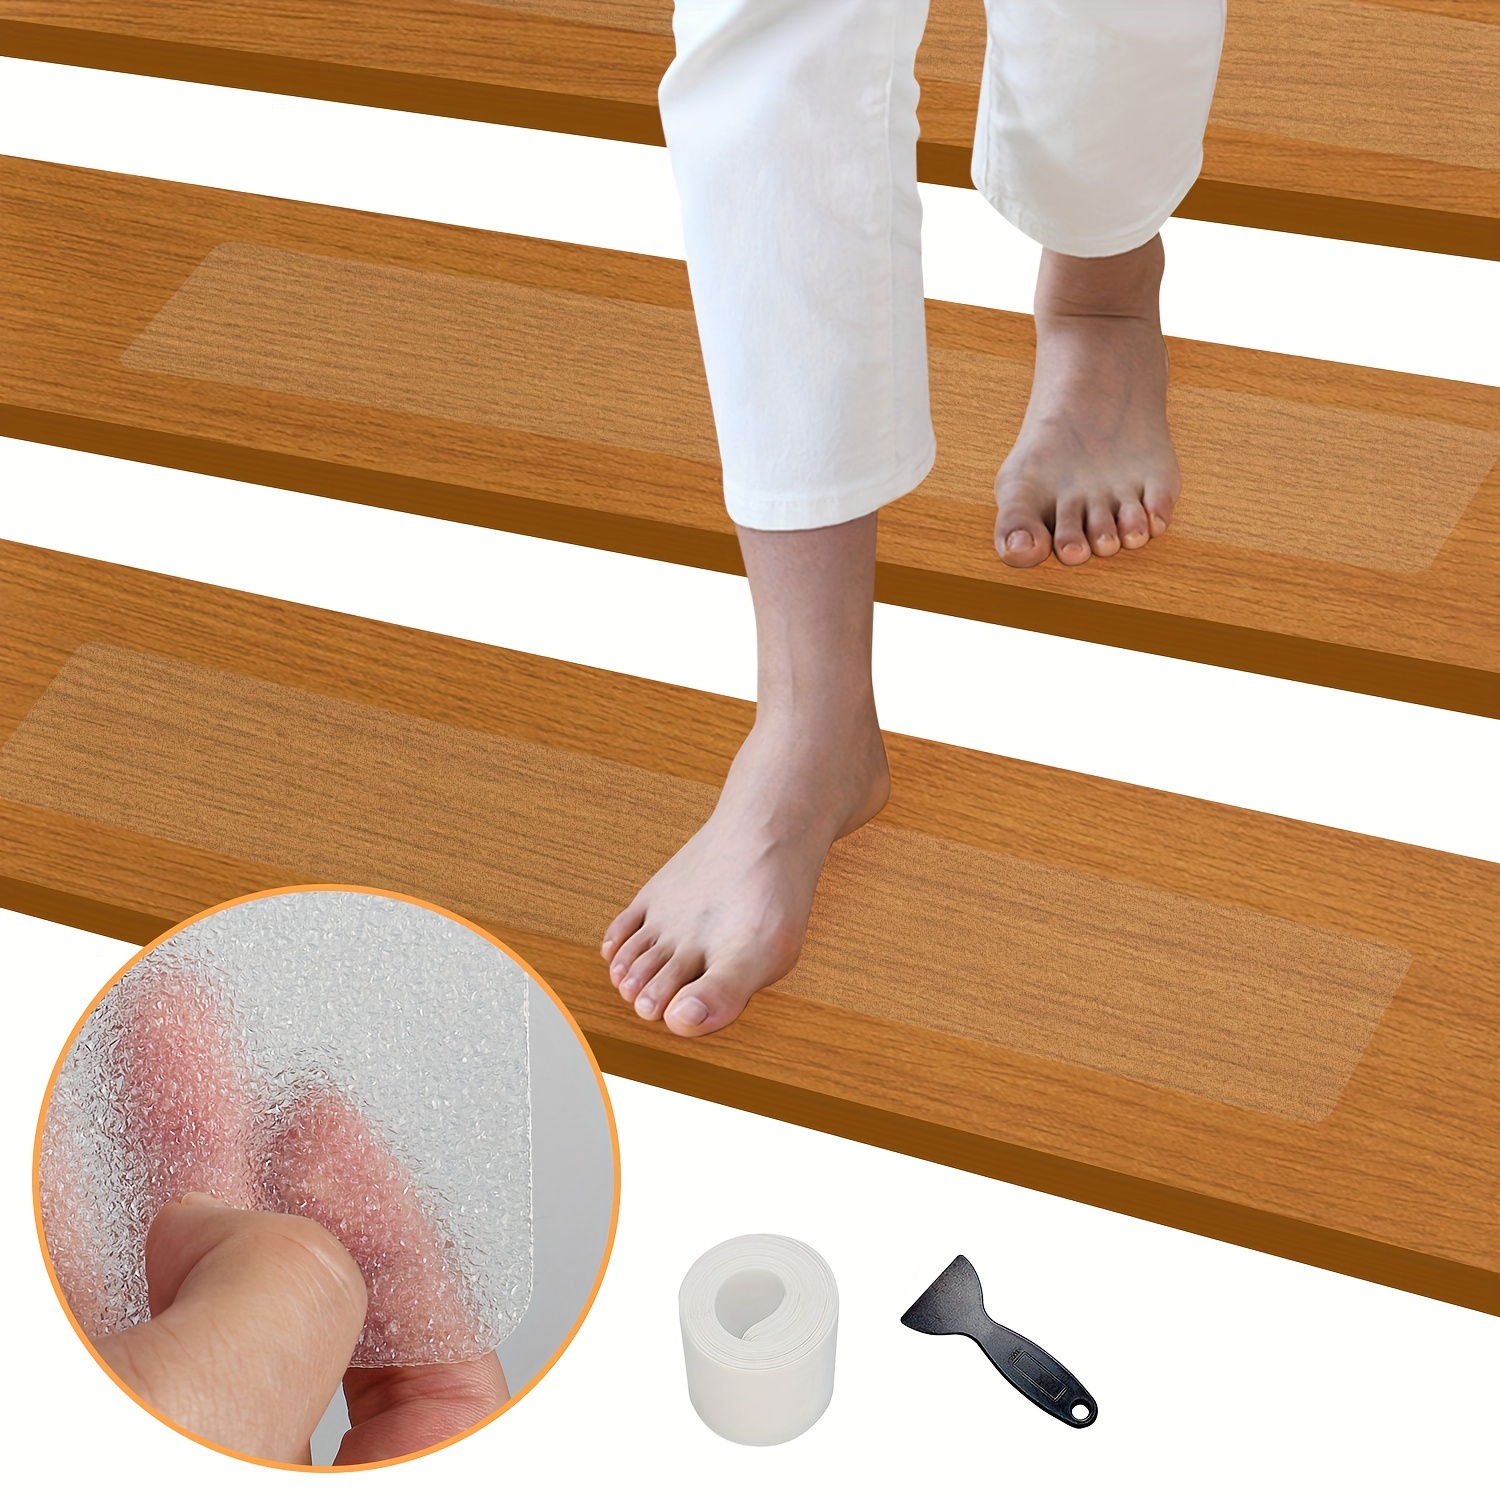 6pcs/10pcs Anti Slip Adhesive Tape Strips. Grip Tape Treads For Stair  Treads & Steps. Clear Non Slip Indoor/Outdoor Adhesive Strips Non-slip Grip  Strips/Tread Runners